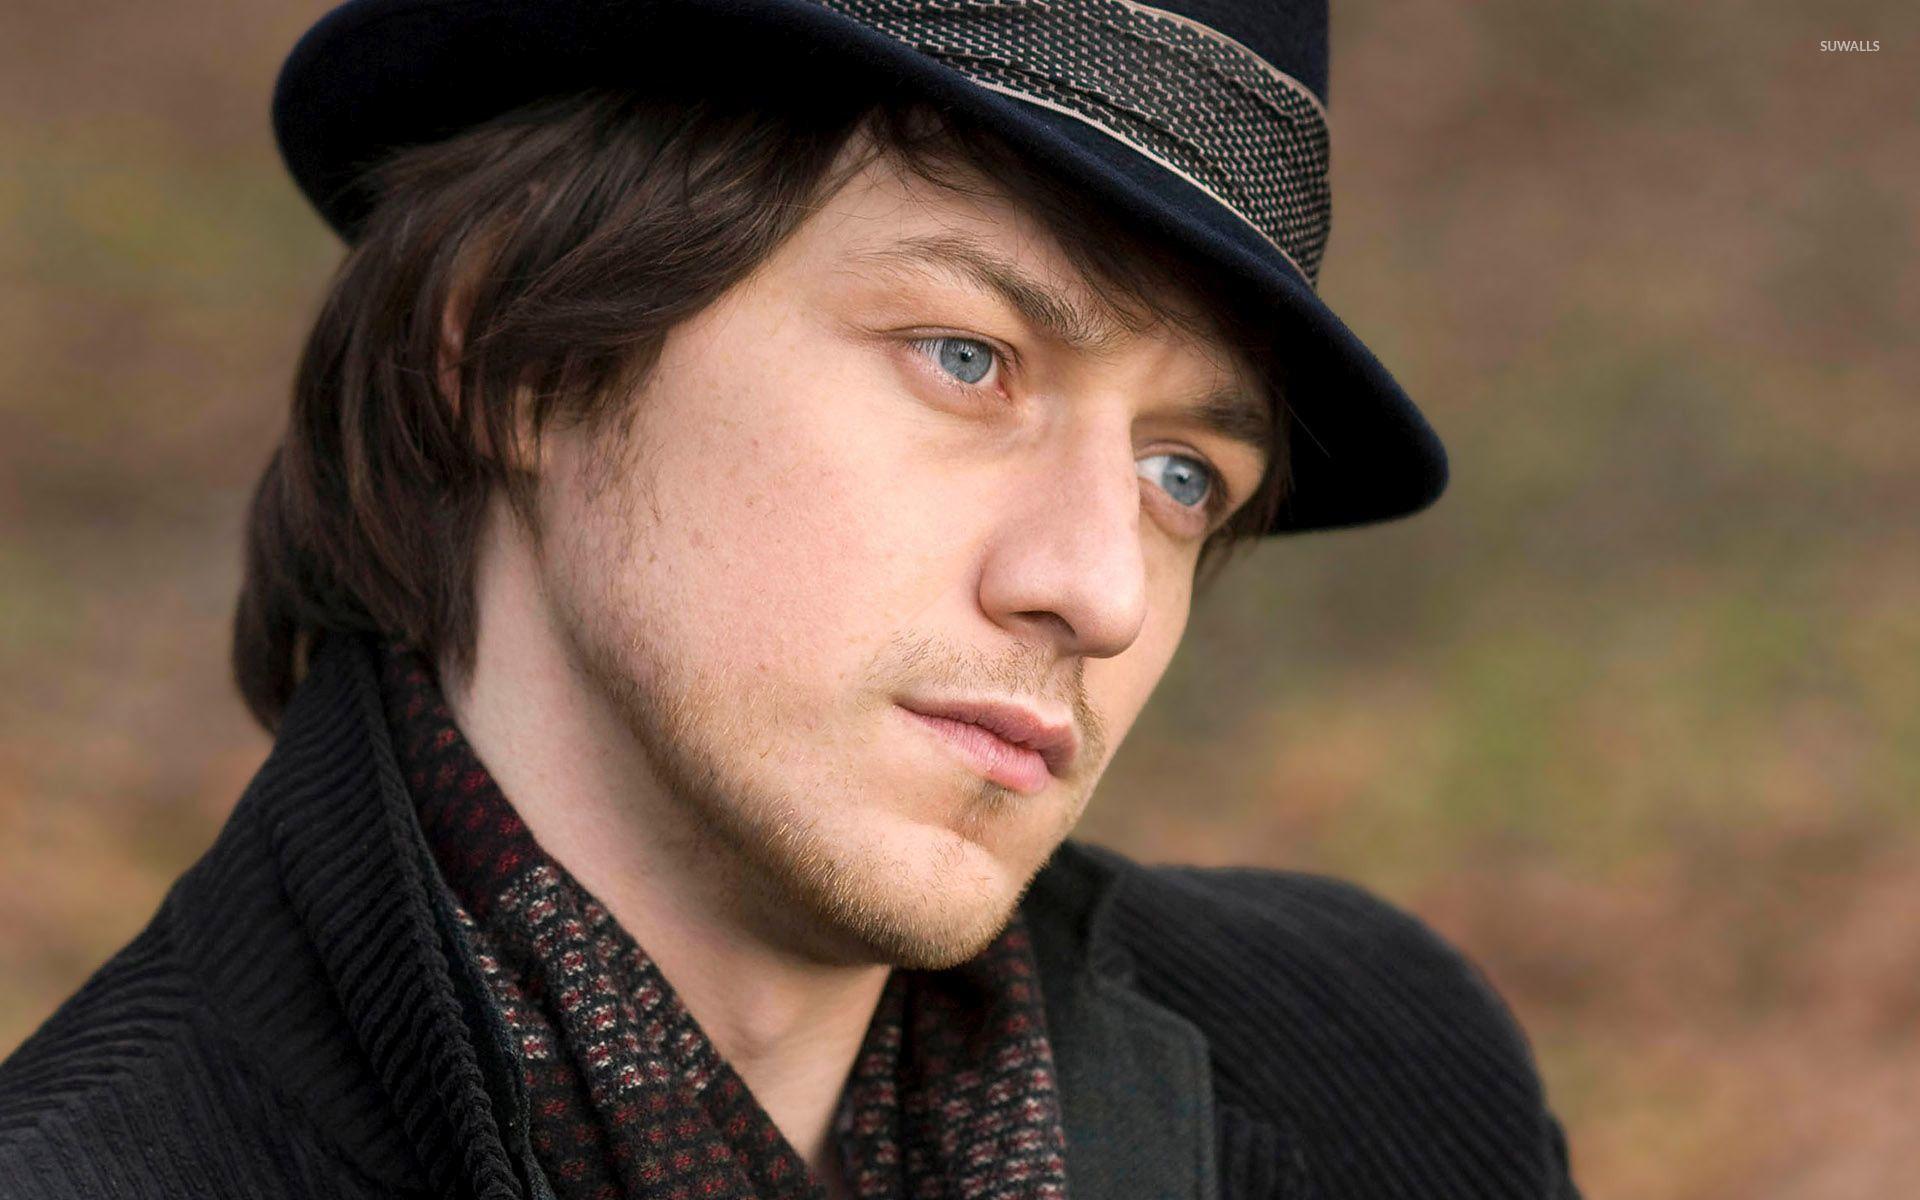 James McAvoy with a black hat wallpaper celebrity